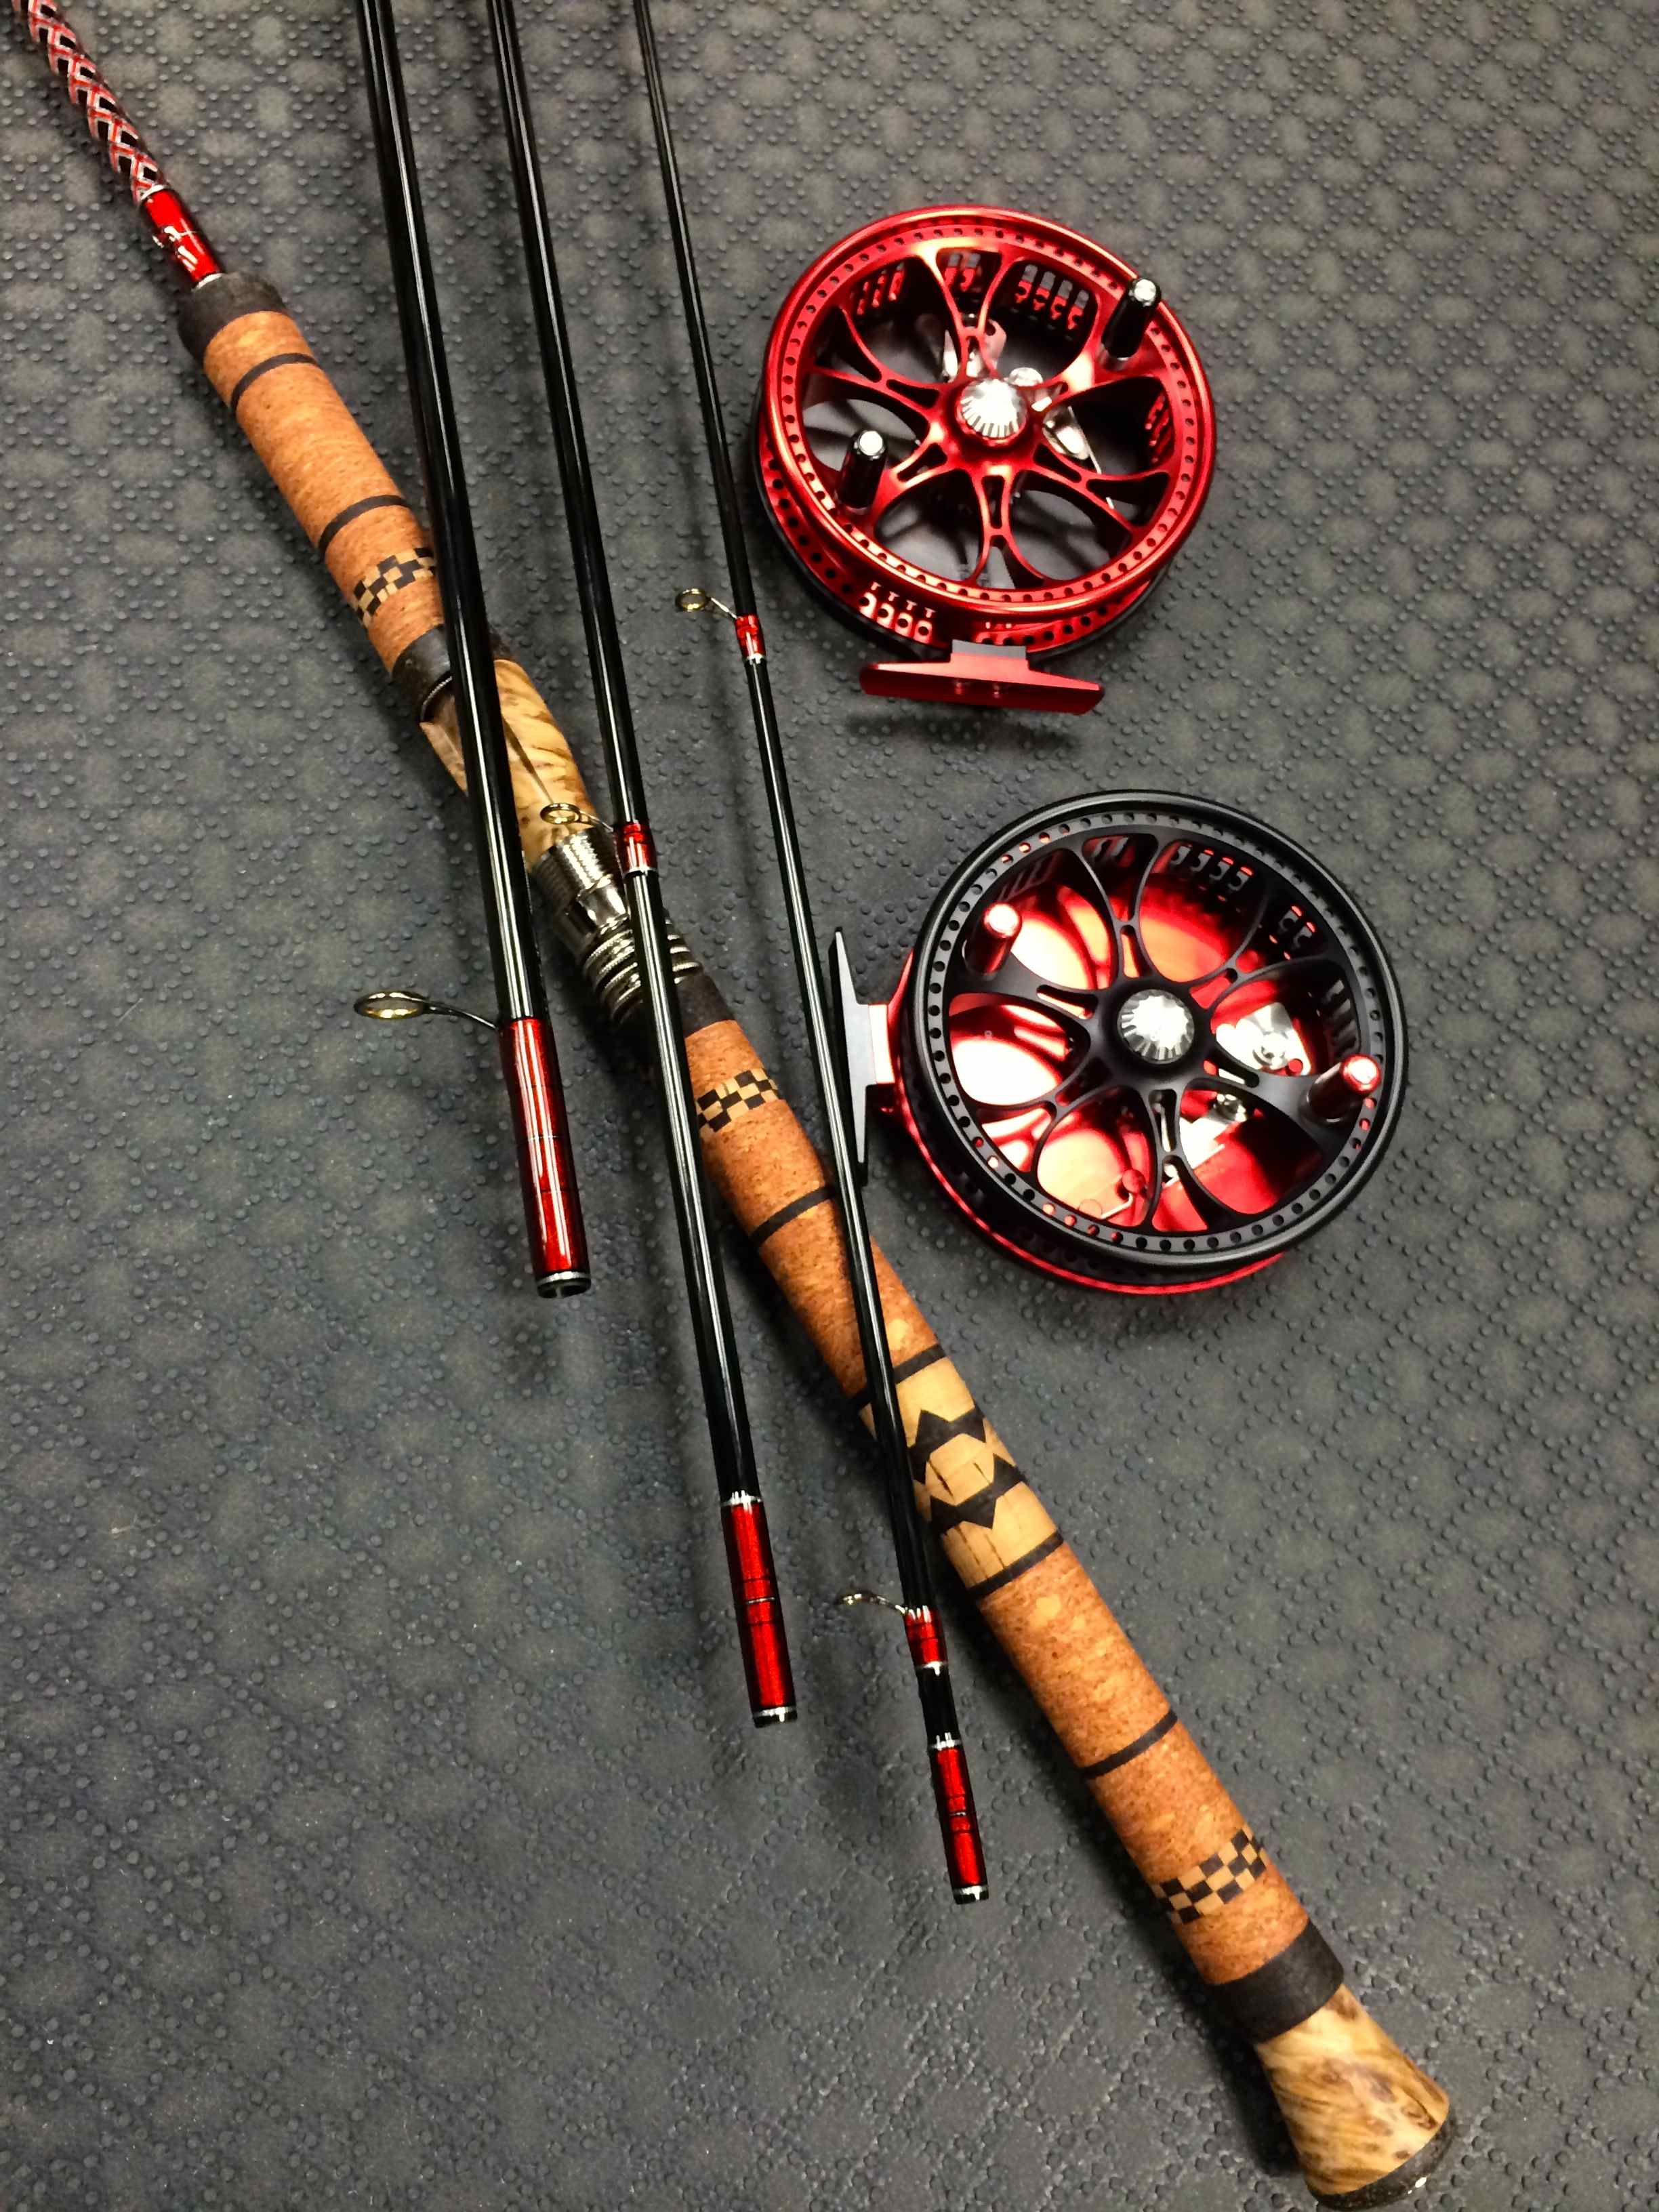 Sage Fishing Rods - Spey to Float / Centerpin Conversions